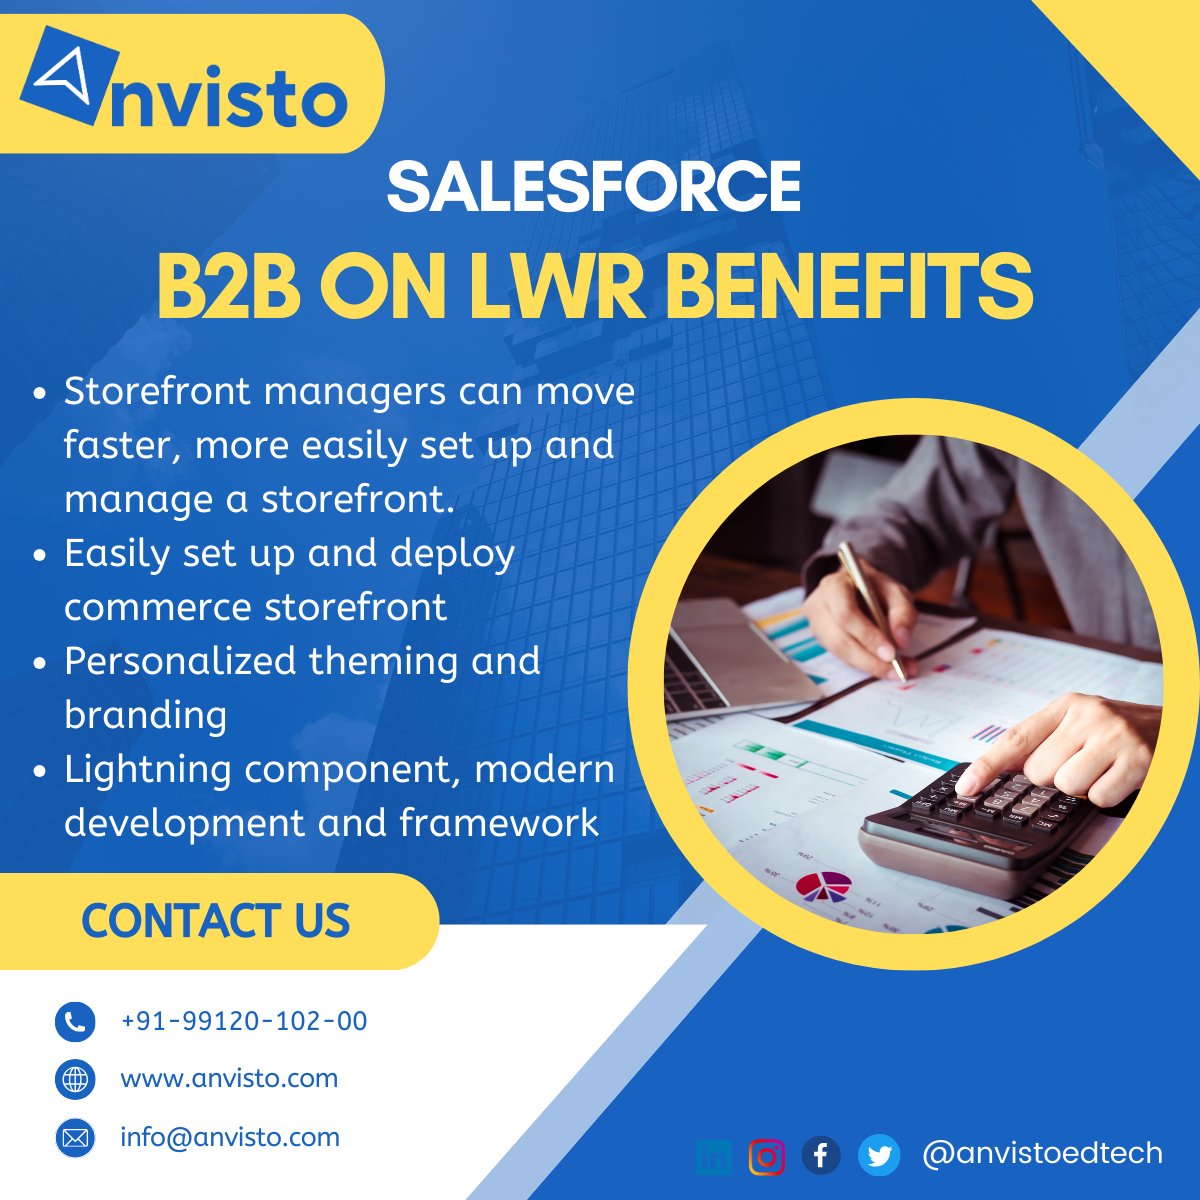 For Salesforce B2B Commerce Cloud (LWR) Corporate Training with official lab reachout to us on +91-99120-102-00
info@anvisto.com, anvisto.com

Anvisto Tech EdHub

#anvisto #salesforce #trainer #corporatetraining #corporate #salesforceb2b #salesforceb2c #salesforcelwc